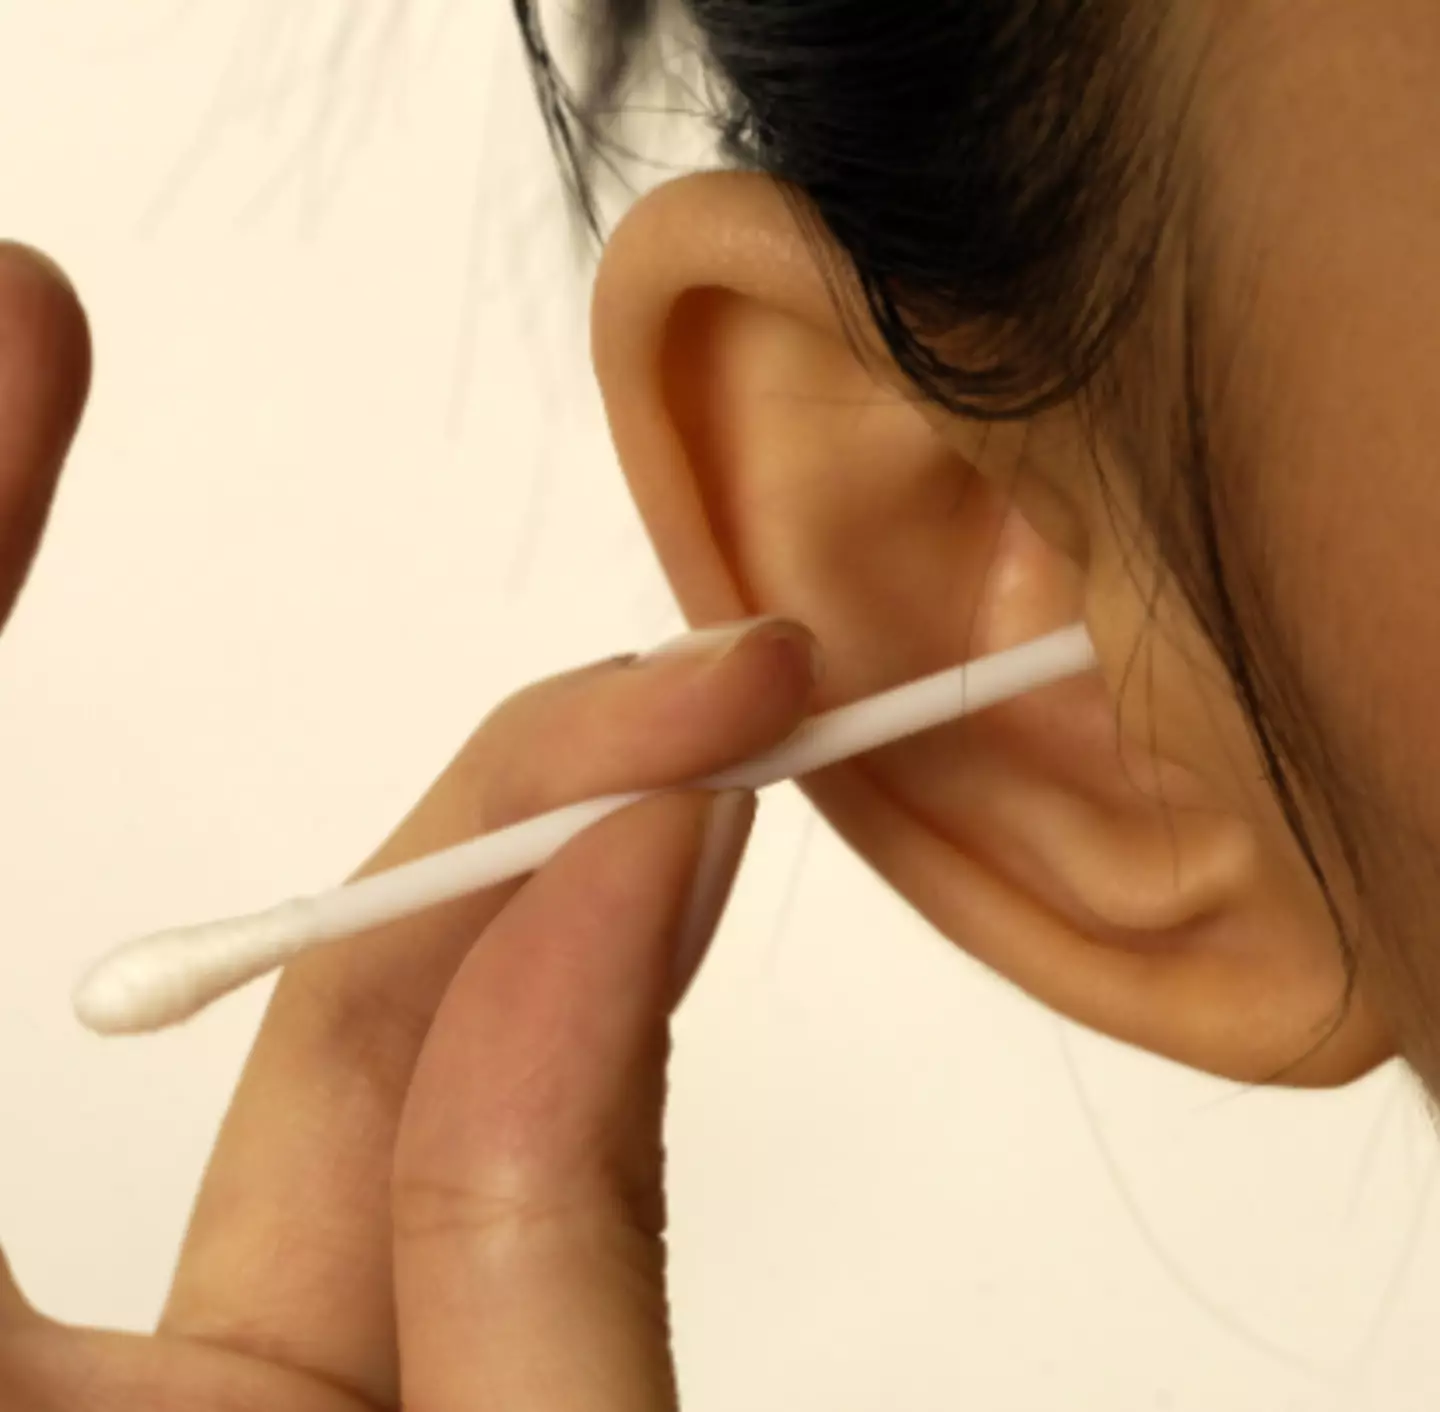 If your ears start to leak with earwax, you should see a doctor.